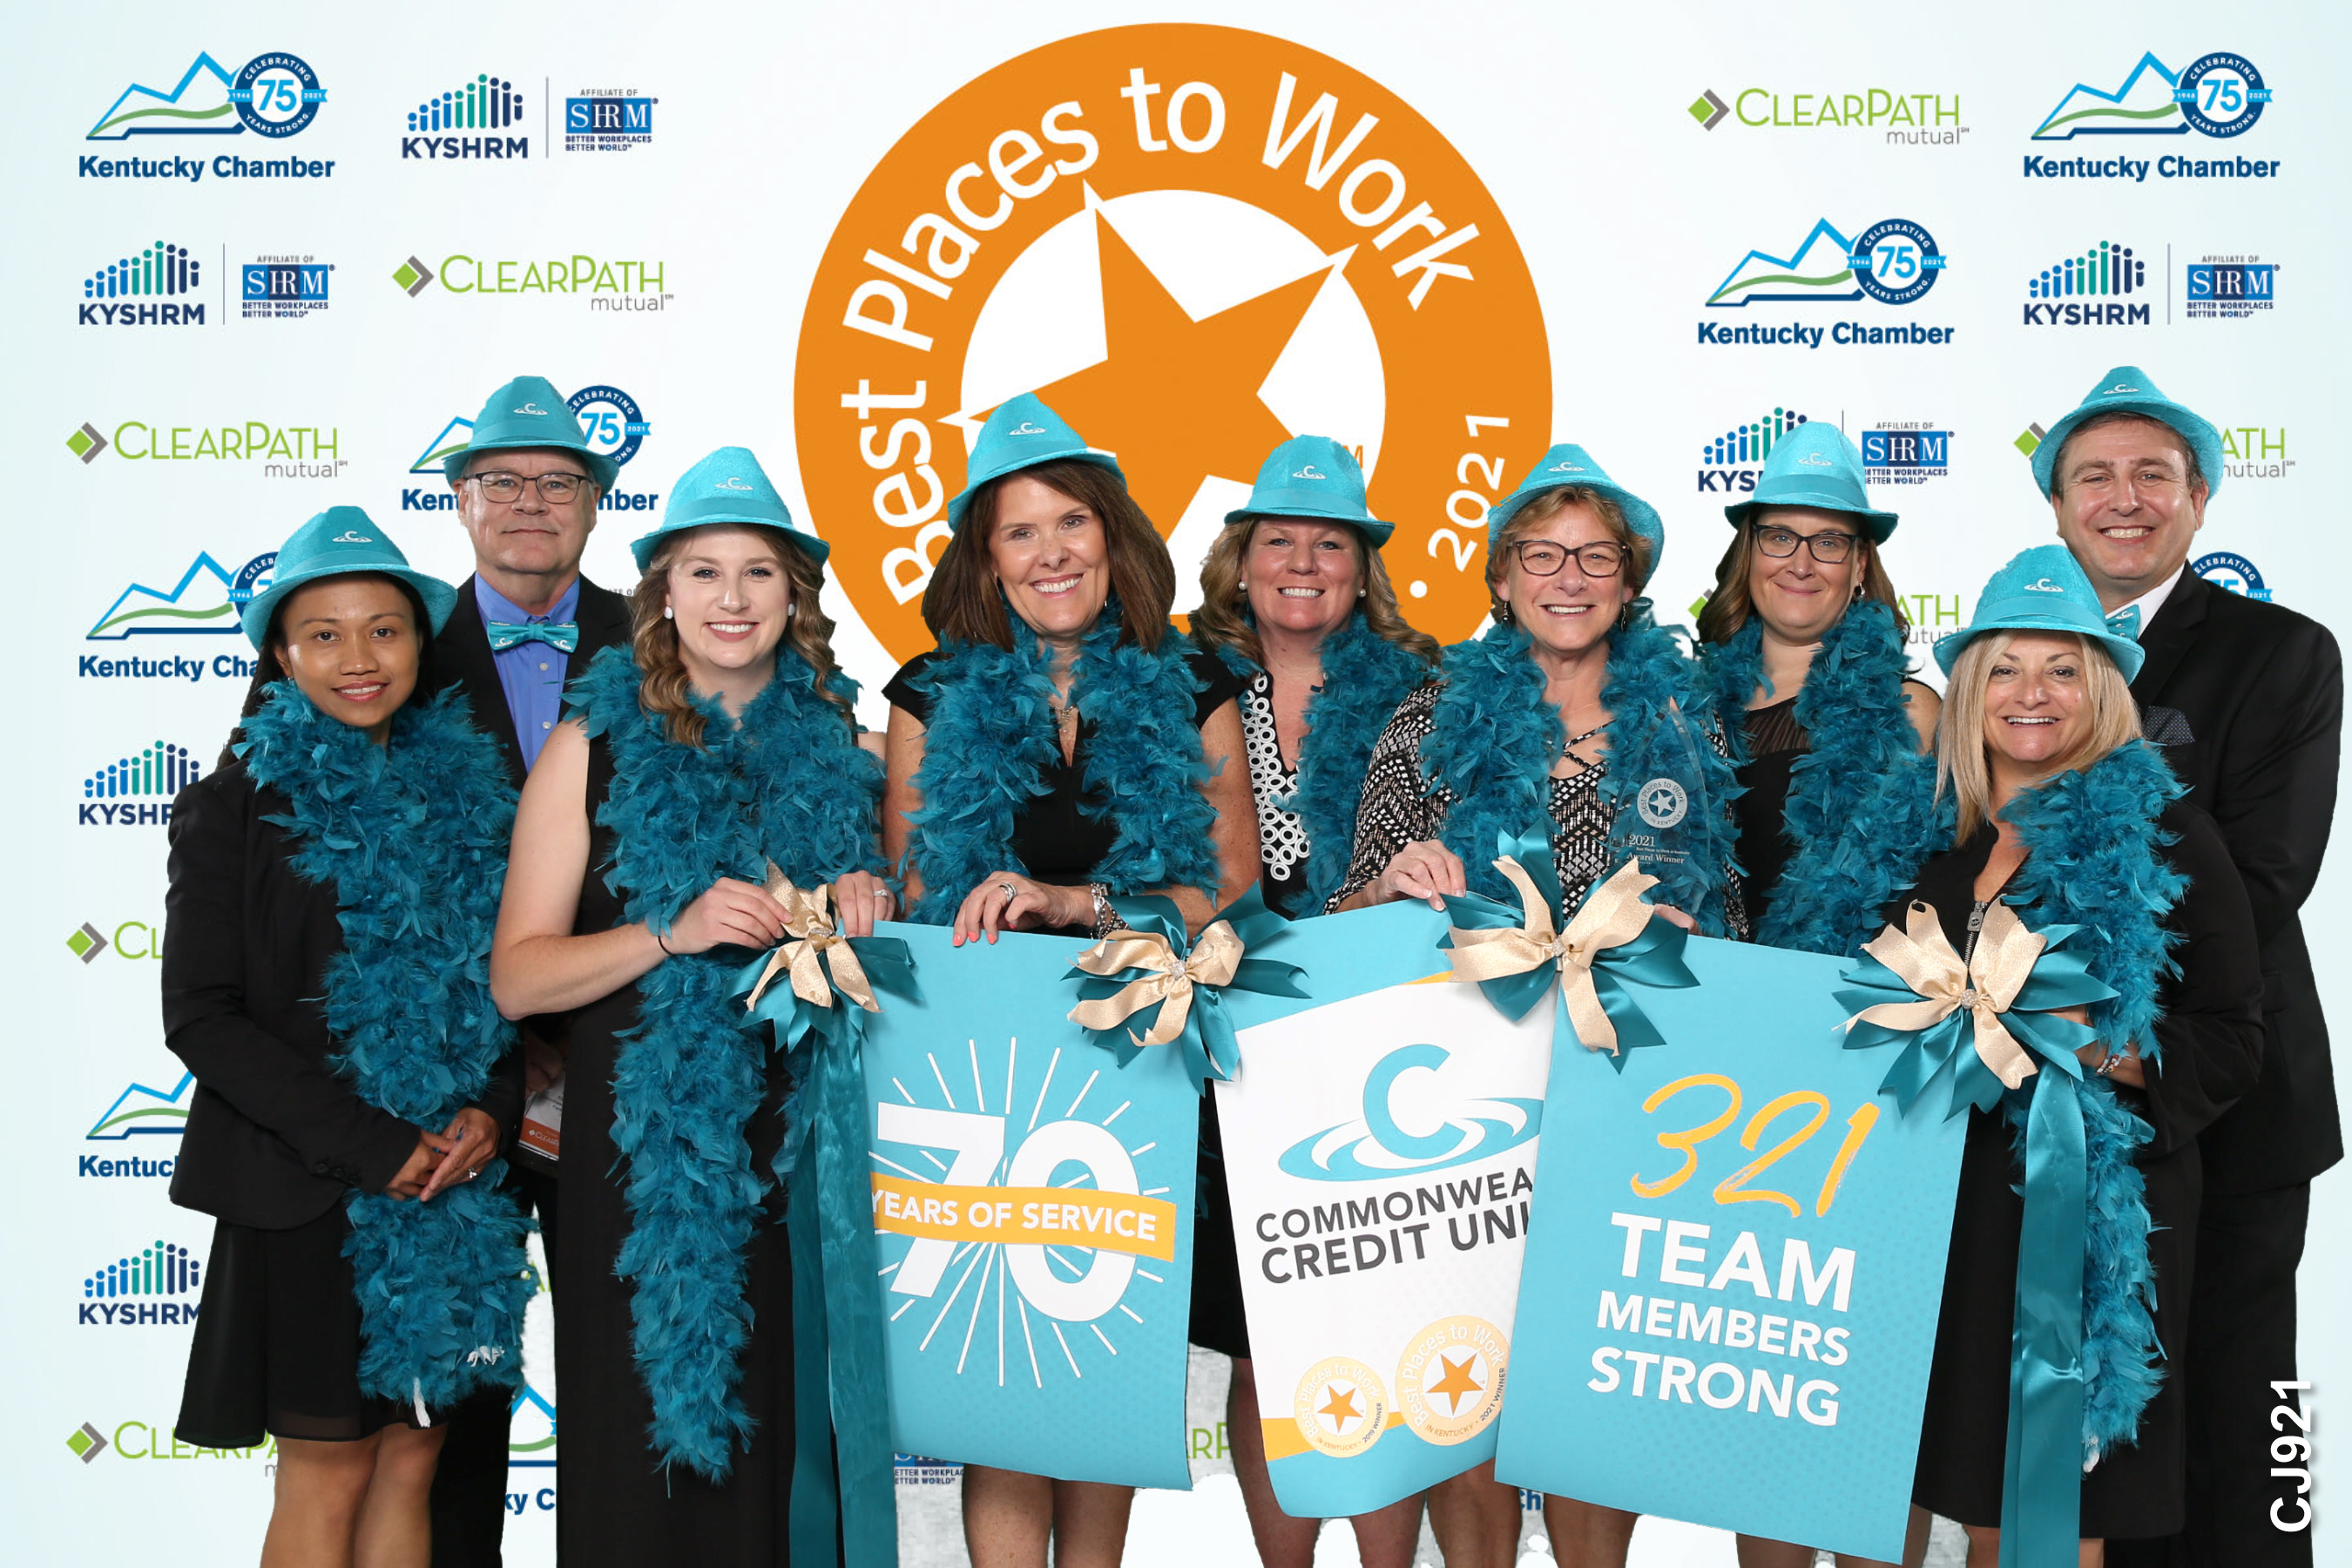 Image of CCU team members and leaders smiling at an event